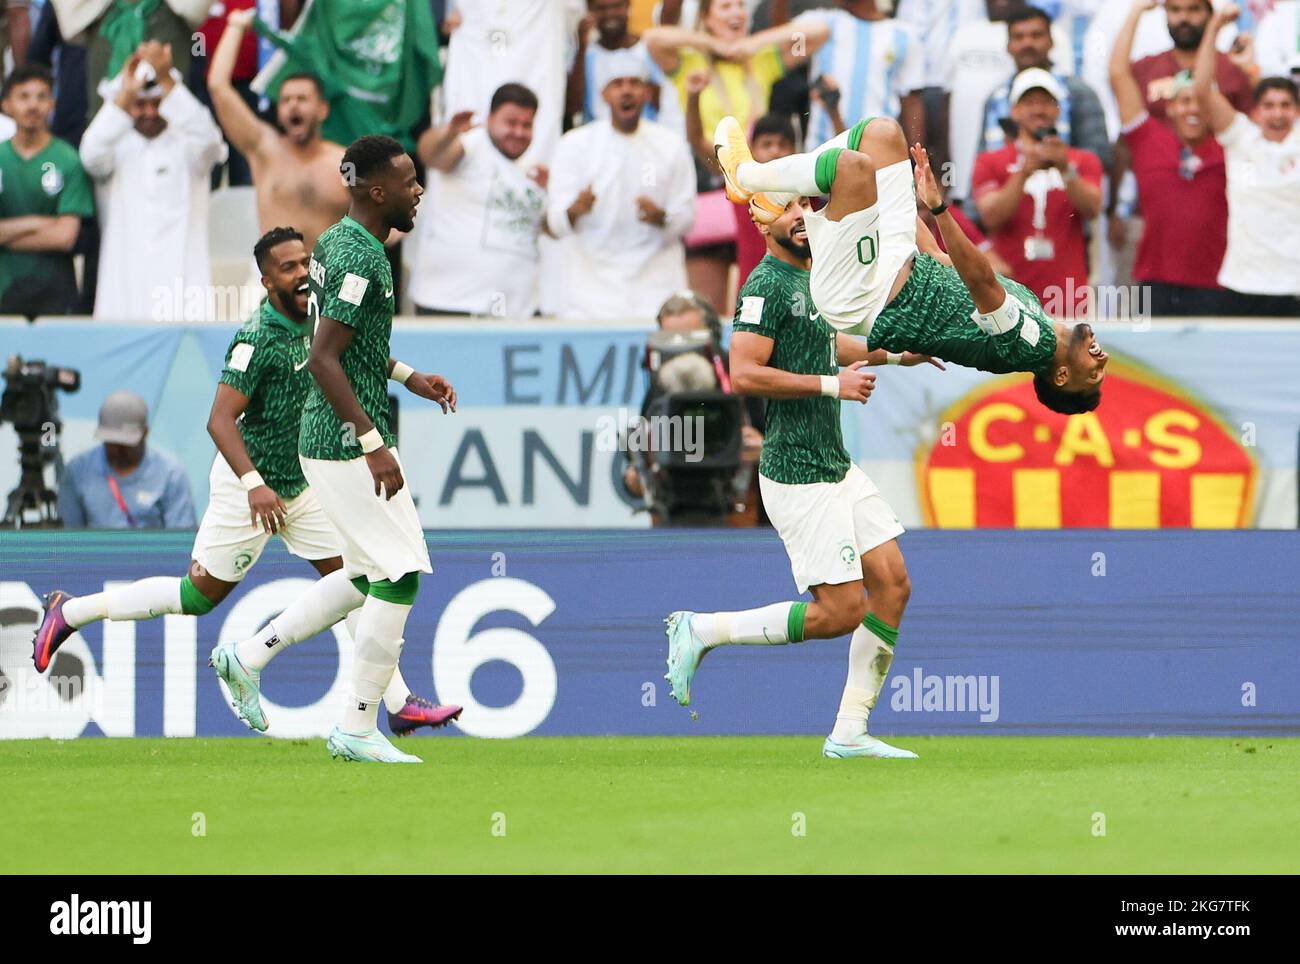 Lusail, Qatar. 22nd Nov, 2022. Salem Aldawsari (1st R) of Saudi Arabia celebrates after scoring during the Group C match between Argentina and Saudi Arabia at the 2022 FIFA World Cup at Lusail Stadium in Lusail, Qatar, Nov. 22, 2022. Credit: Cao Can/Xinhua/Alamy Live News Stock Photo